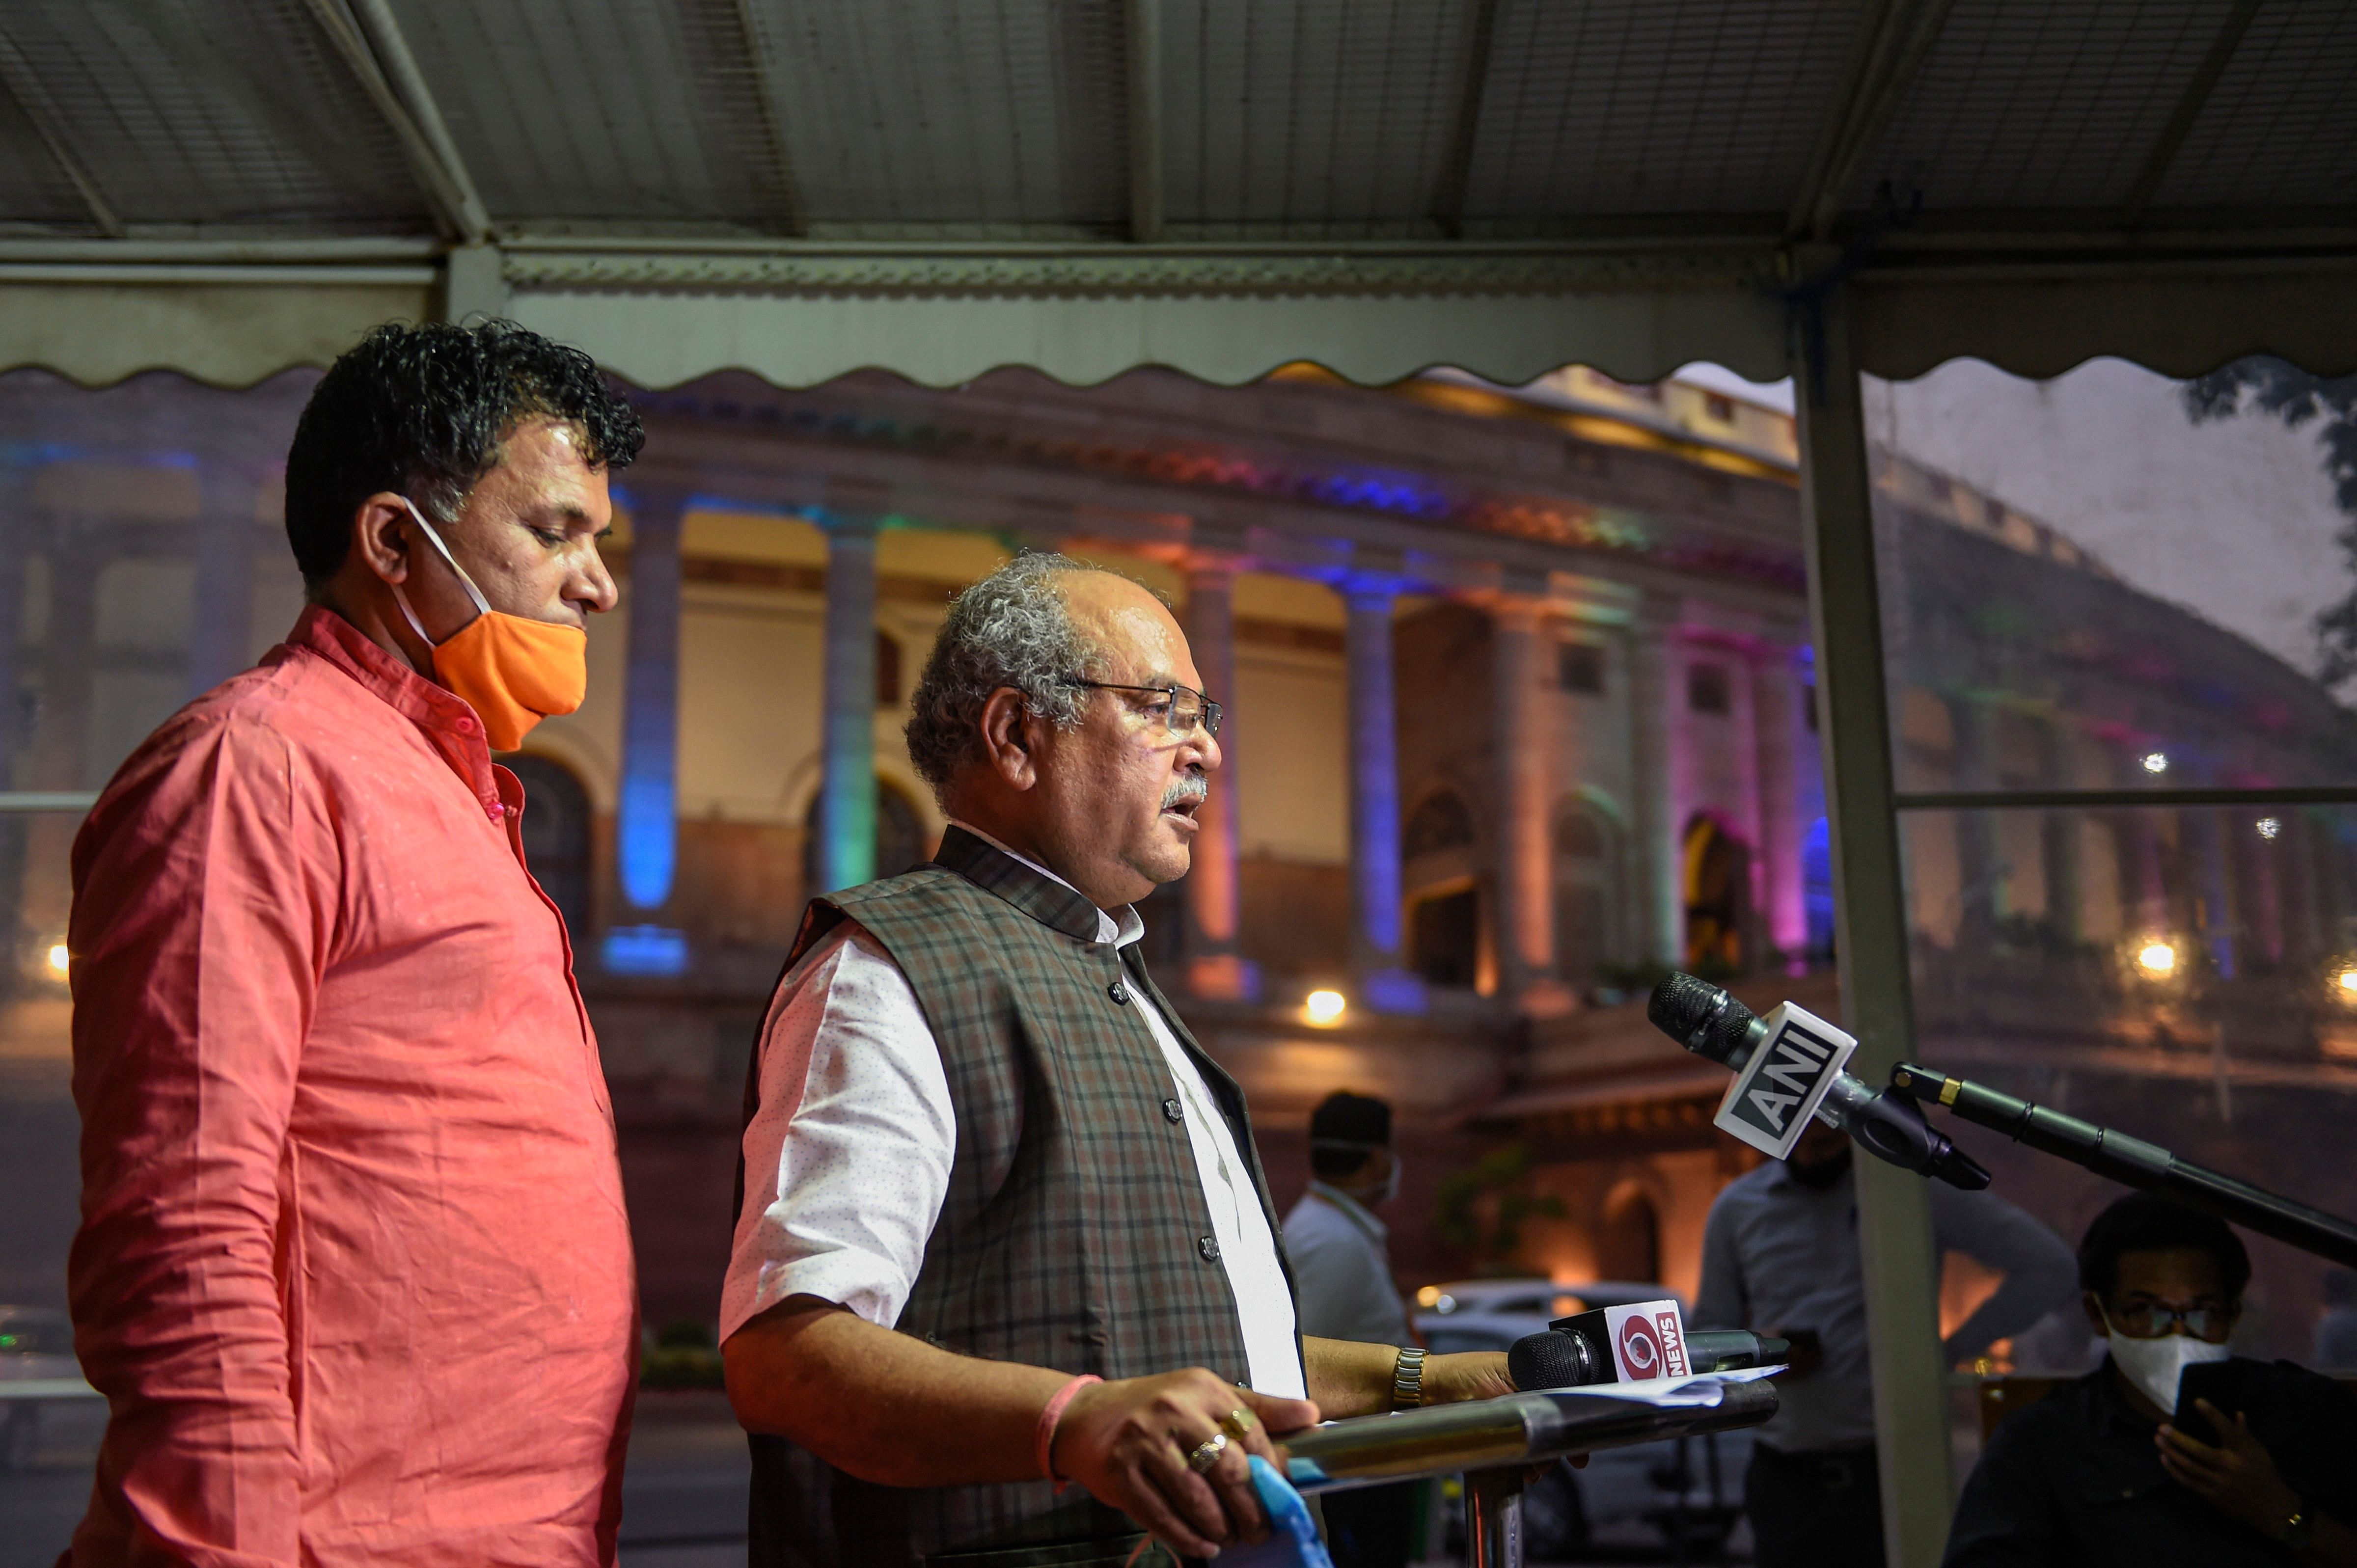 Union Agriculture Minister Narendra Singh Tomar with Minister of State for Agriculture Kailash Choudhary addresses the media in Parliament House premises. Credits: PTI Photo